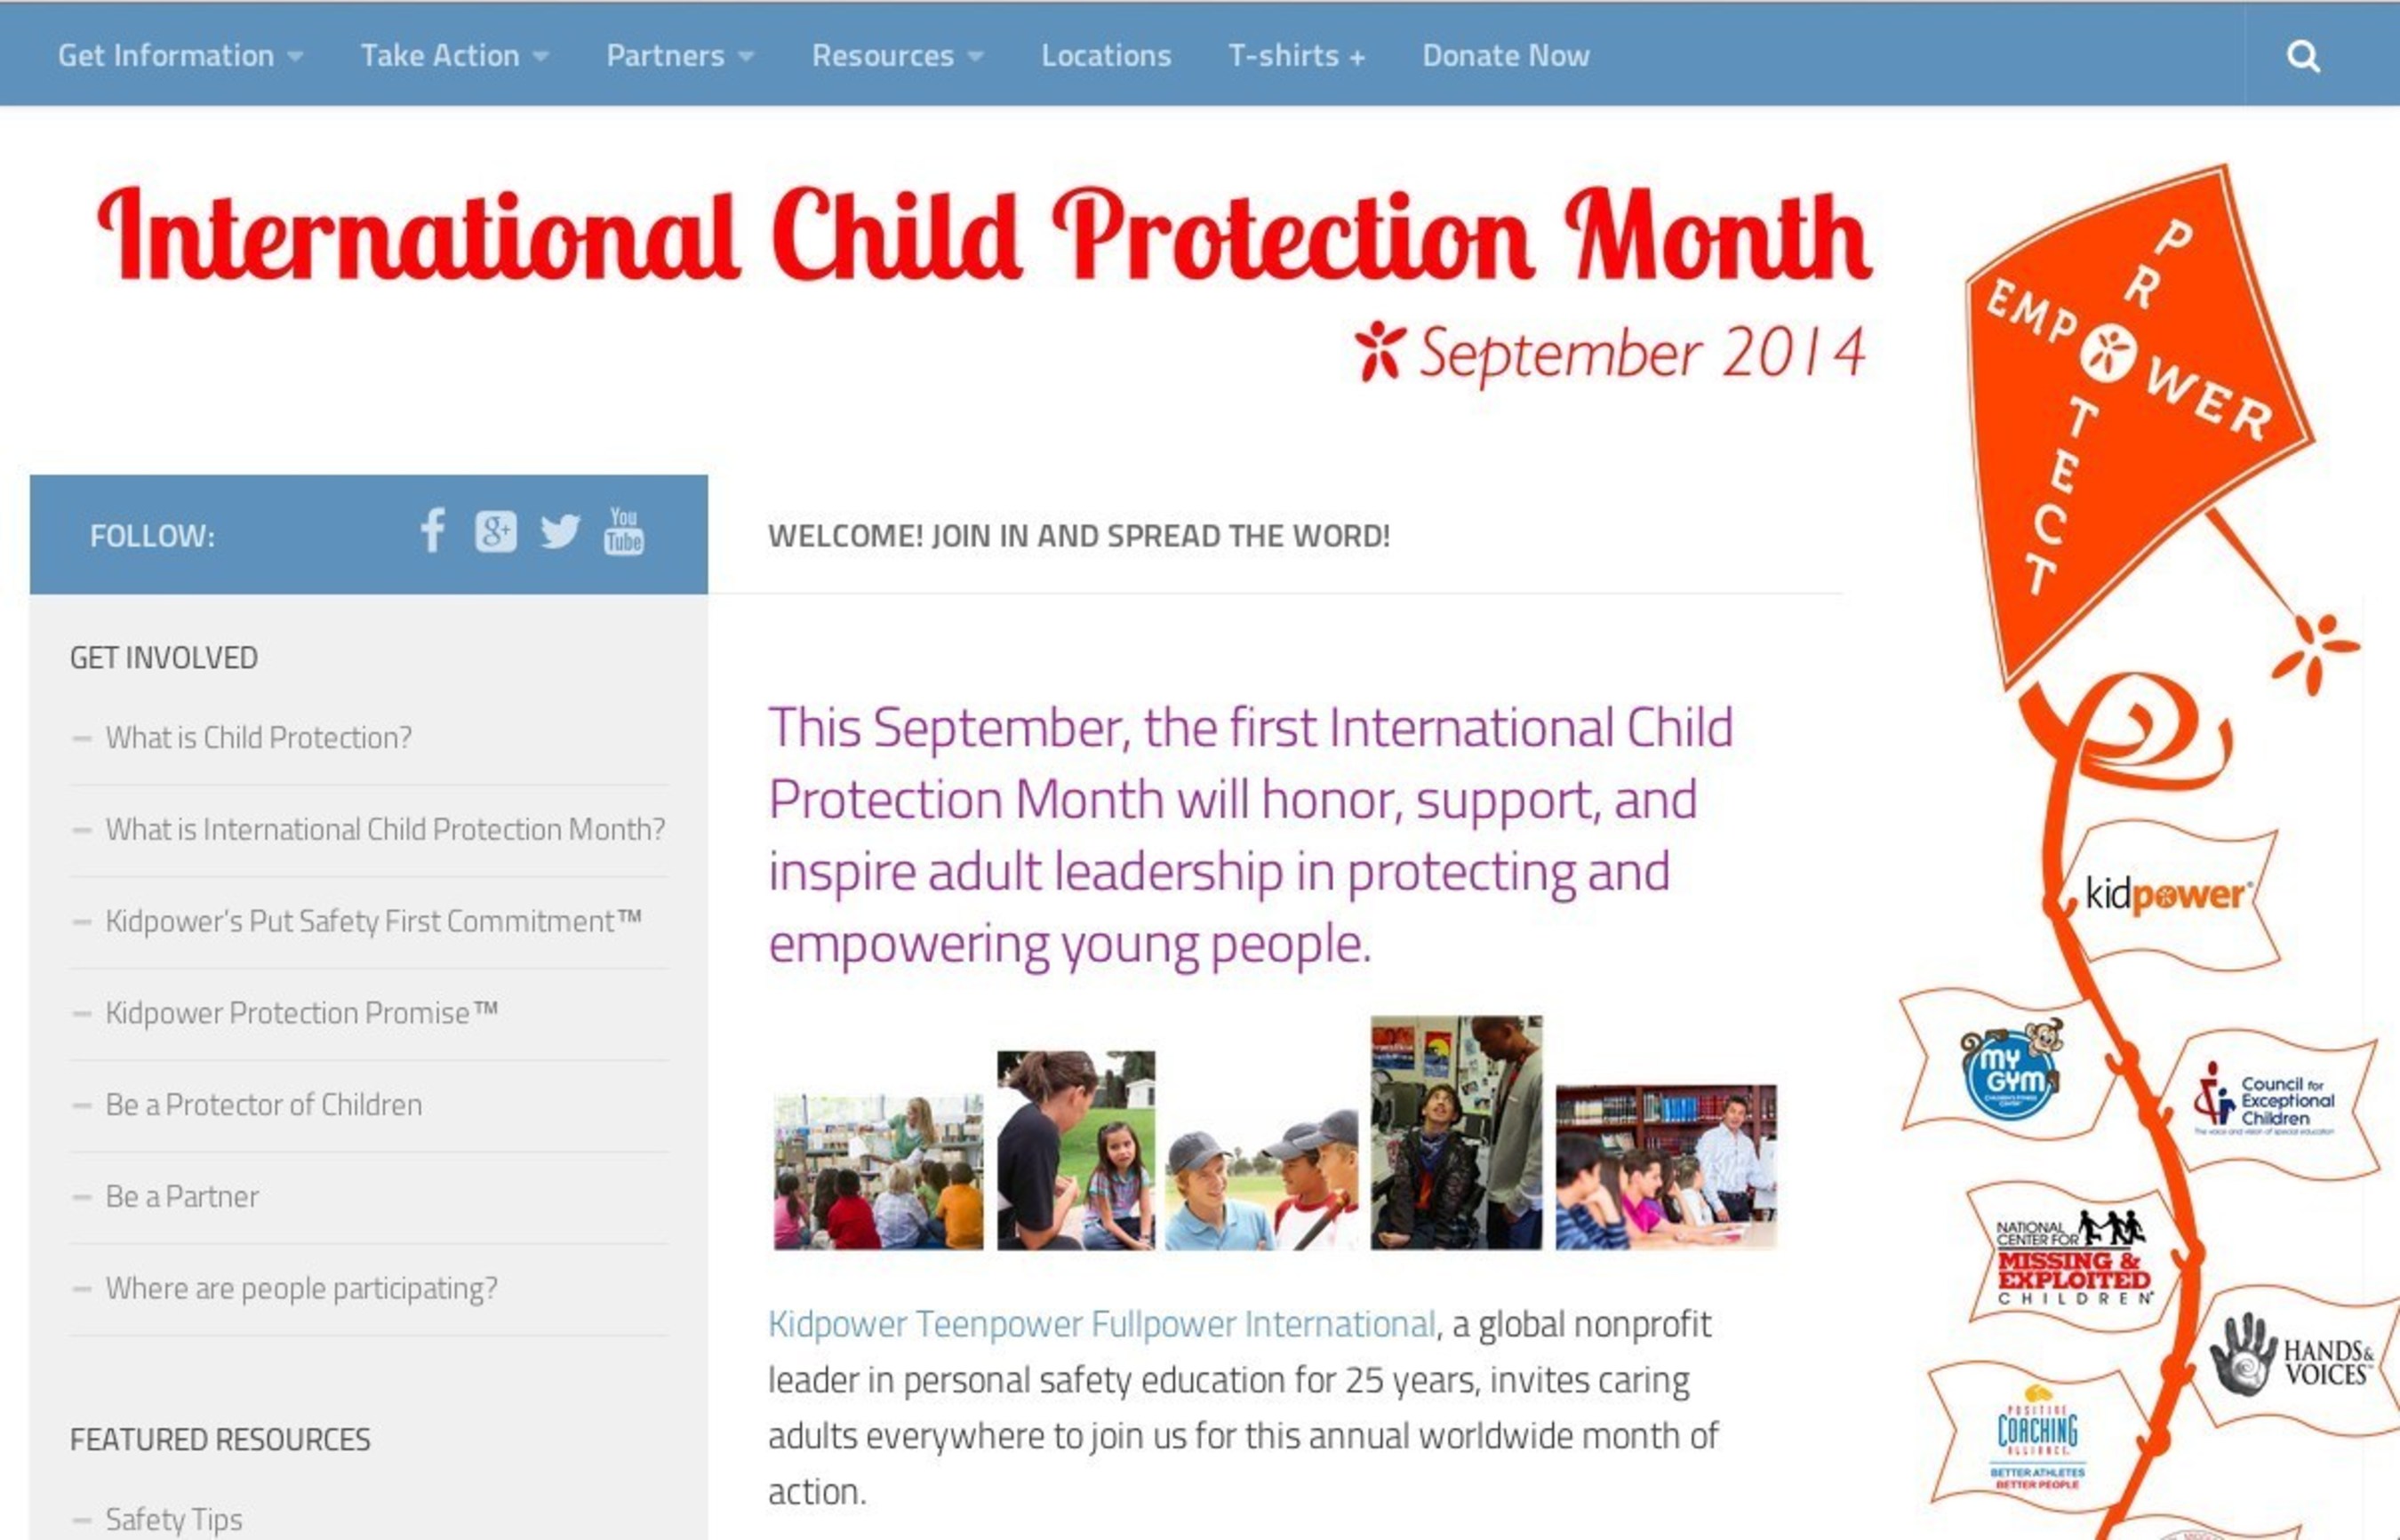 This September, the first International Child Protection Month will honor, support, and inspire adult leadership in protecting and empowering young people. Go to www.InternationalChildProtectionMonth.org for free resources and ways to get involved. (PRNewsFoto/Kidpower)